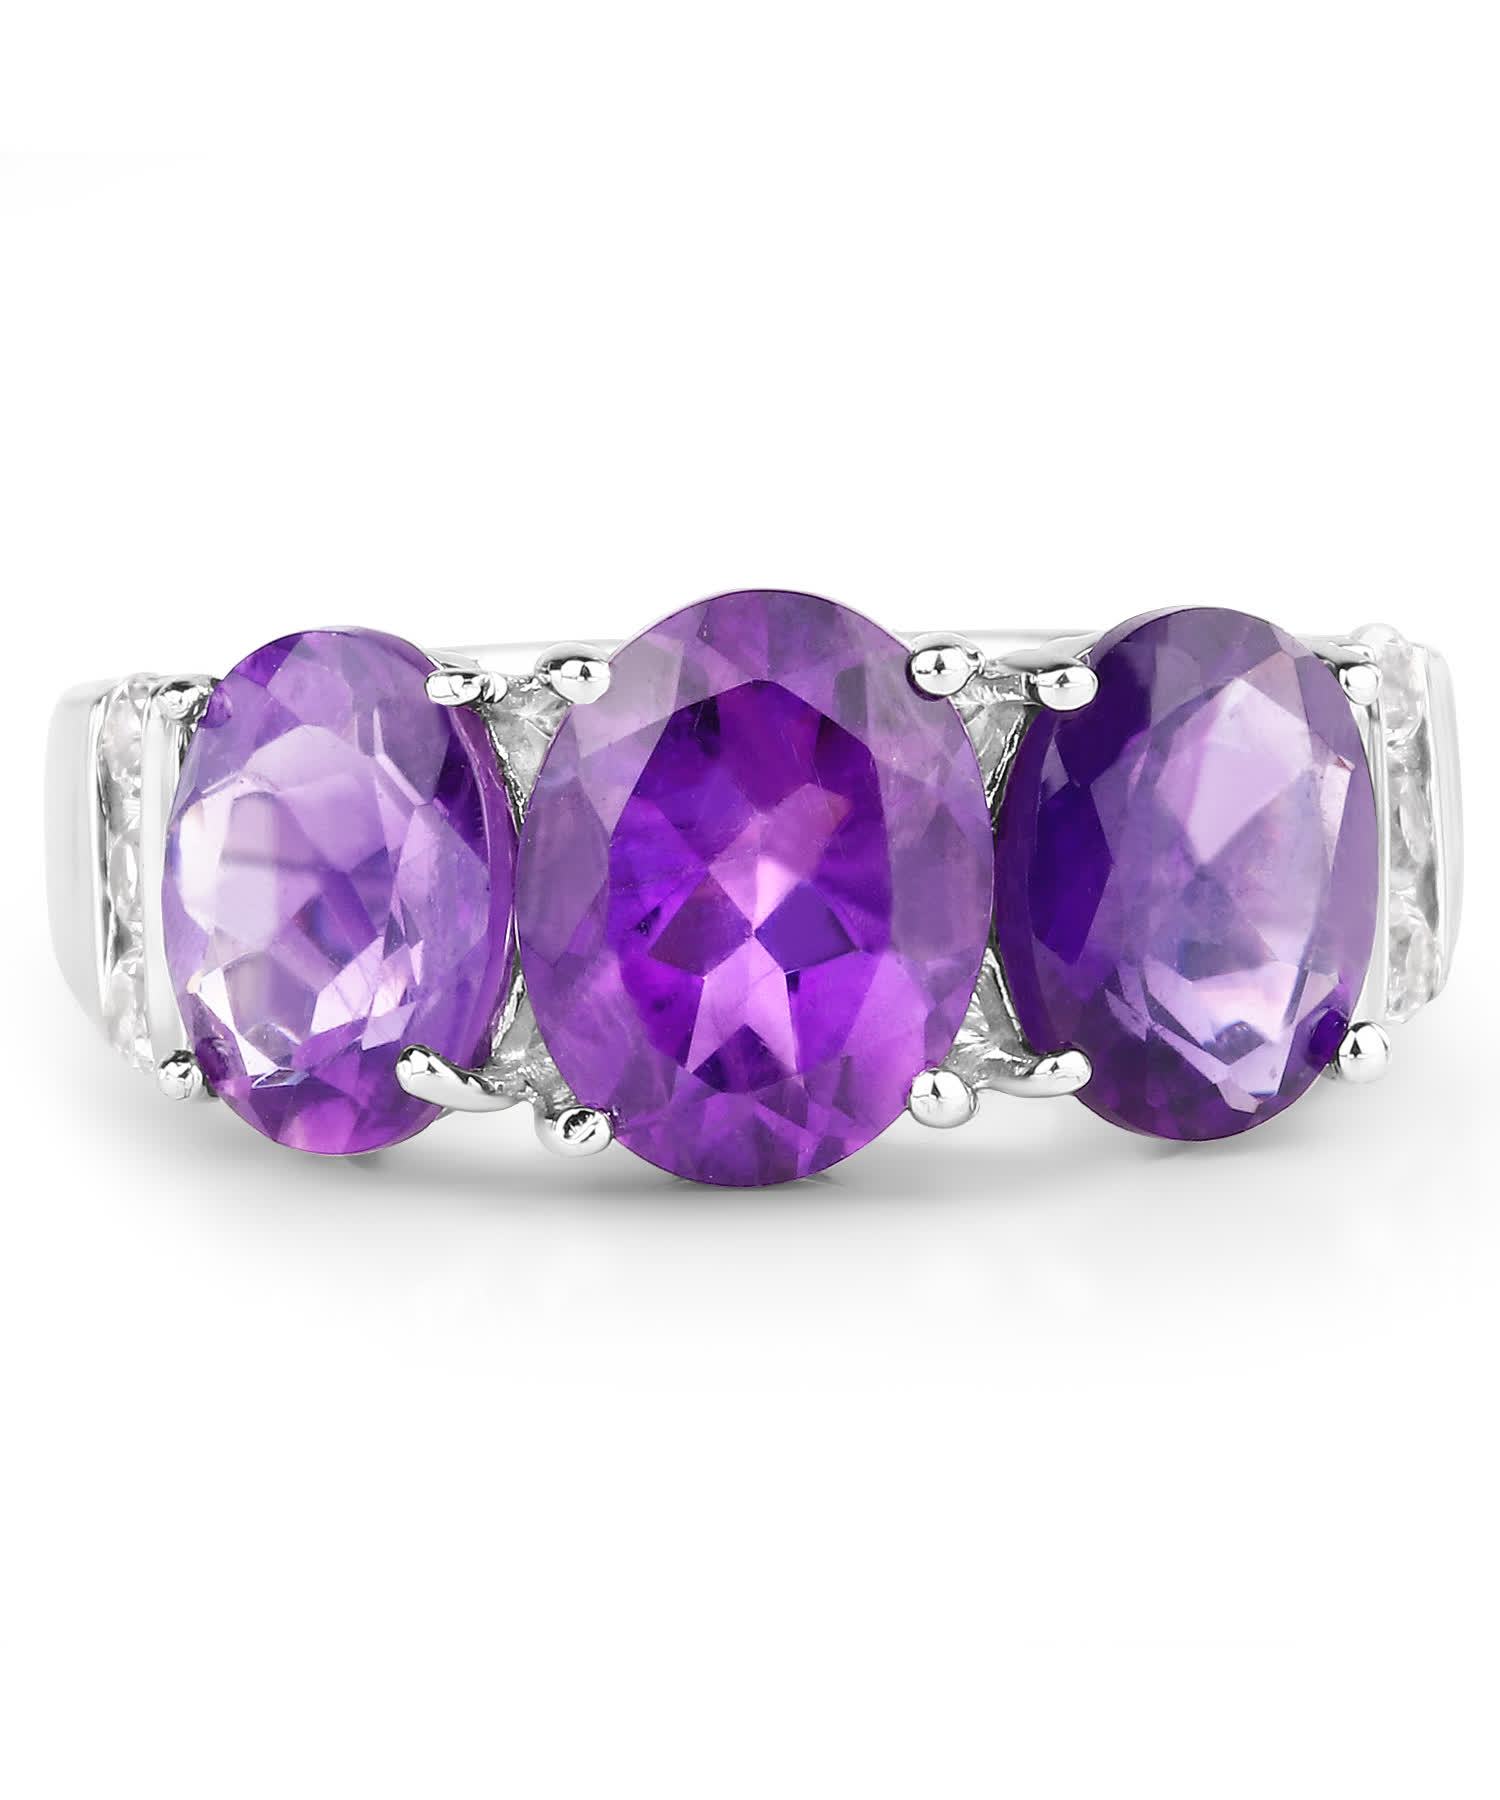 4.14ctw Natural Amethyst and Topaz Rhodium Plated 925 Sterling Silver Three-Stone Three-Stone Ring View 3